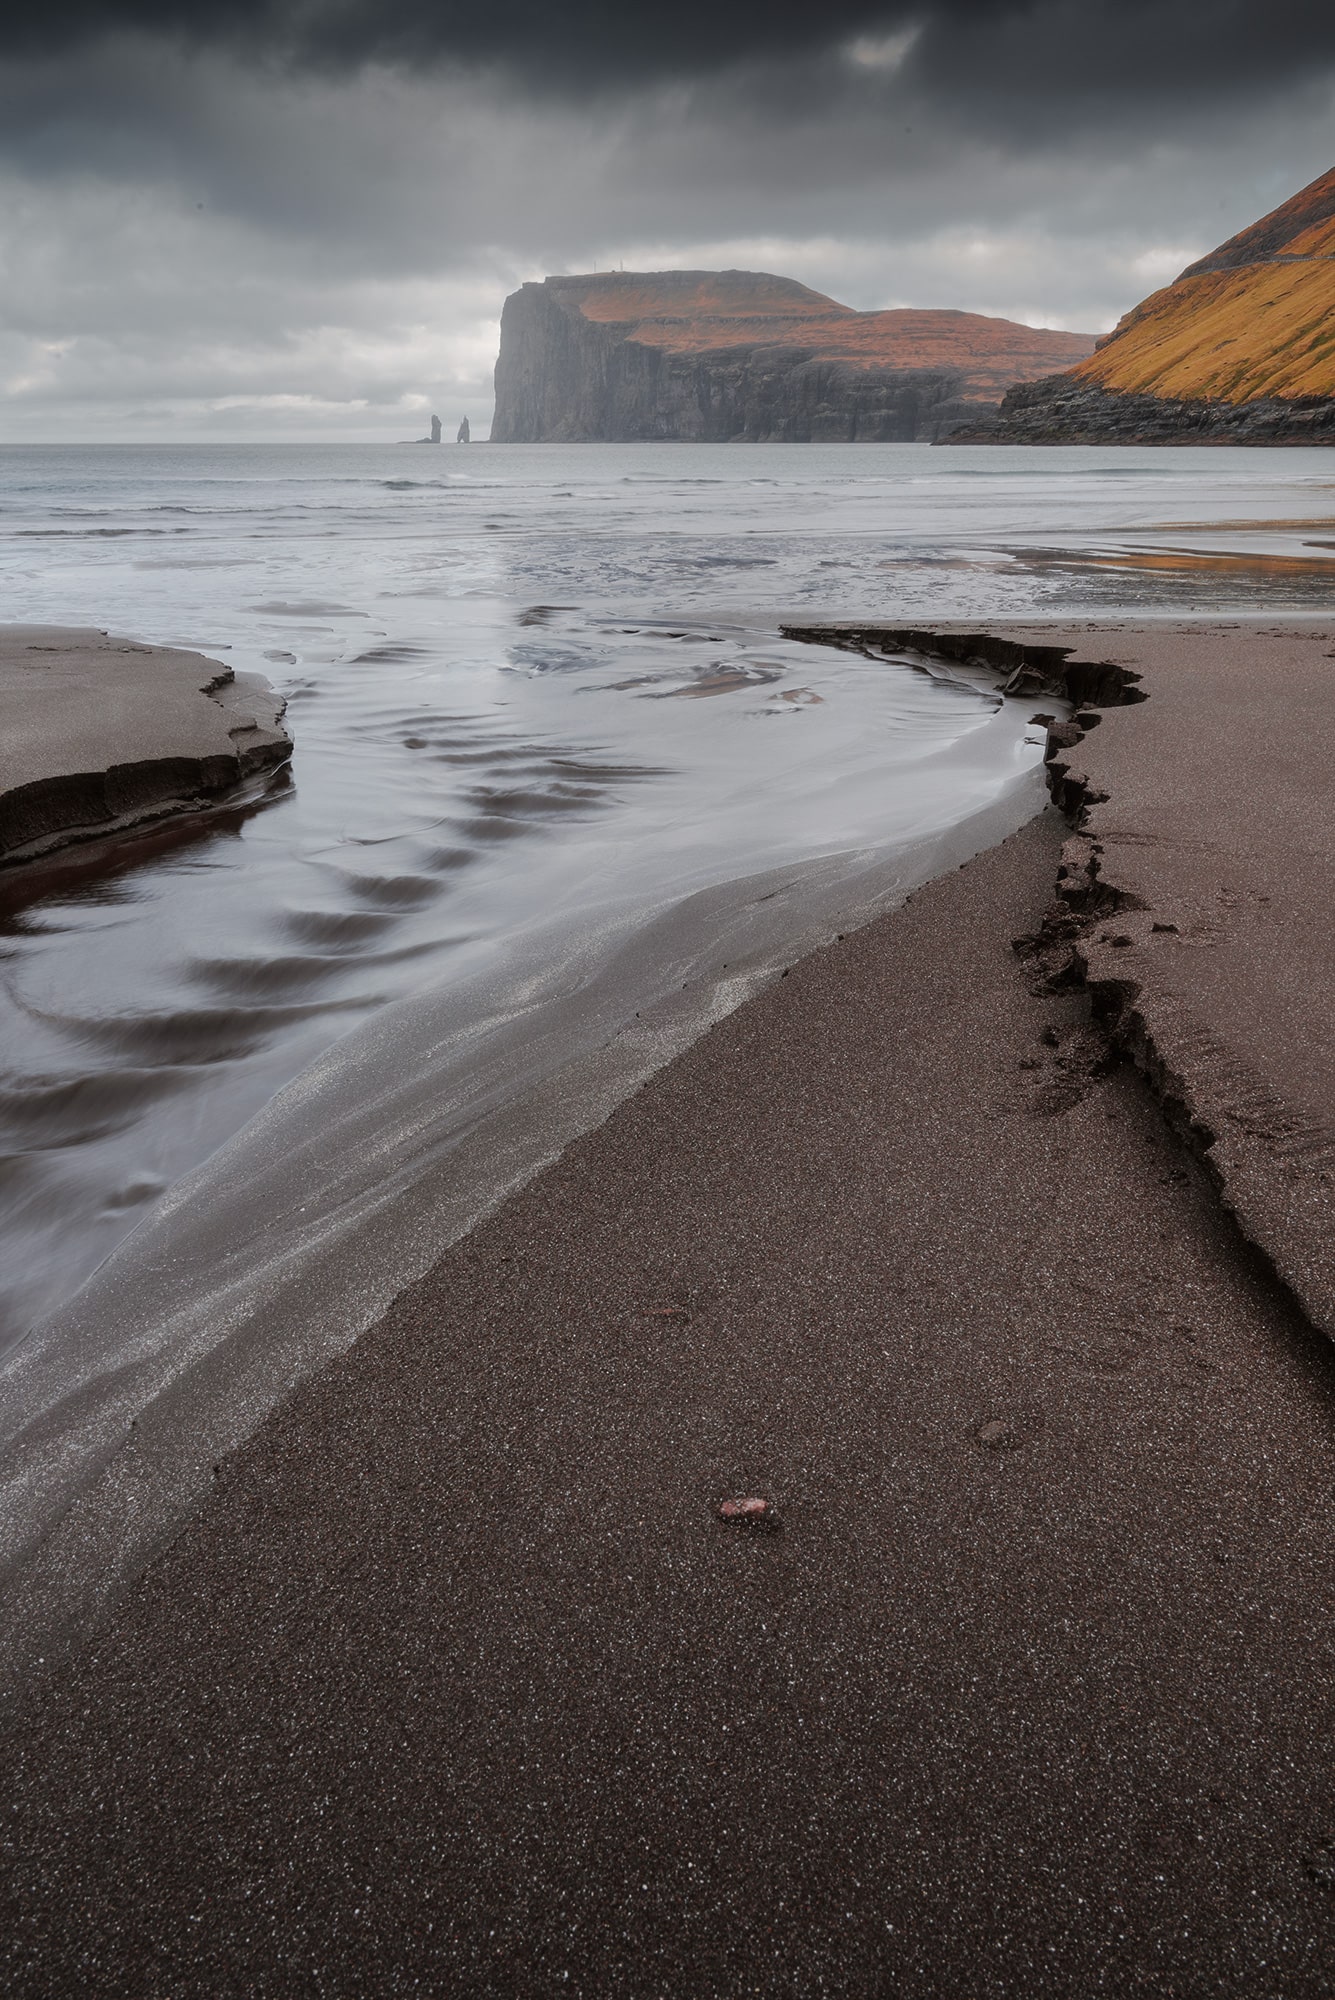 Explore the captivating beauty of landscape photography with this stunning image capturing the two sea stacks as seen from the black sand beach of Tjørnuvík, situated in the northernmost village of Streymoy island in the Faroe Islands. Immerse yourself in the breathtaking scenery as the rugged cliffs rise majestically from the sea, creating a striking contrast against the pristine shoreline. Witness the raw and untouched beauty of nature's wonders in this mesmerizing composition. Discover more awe-inspiring landscapes and captivating moments in our photography portfolio.